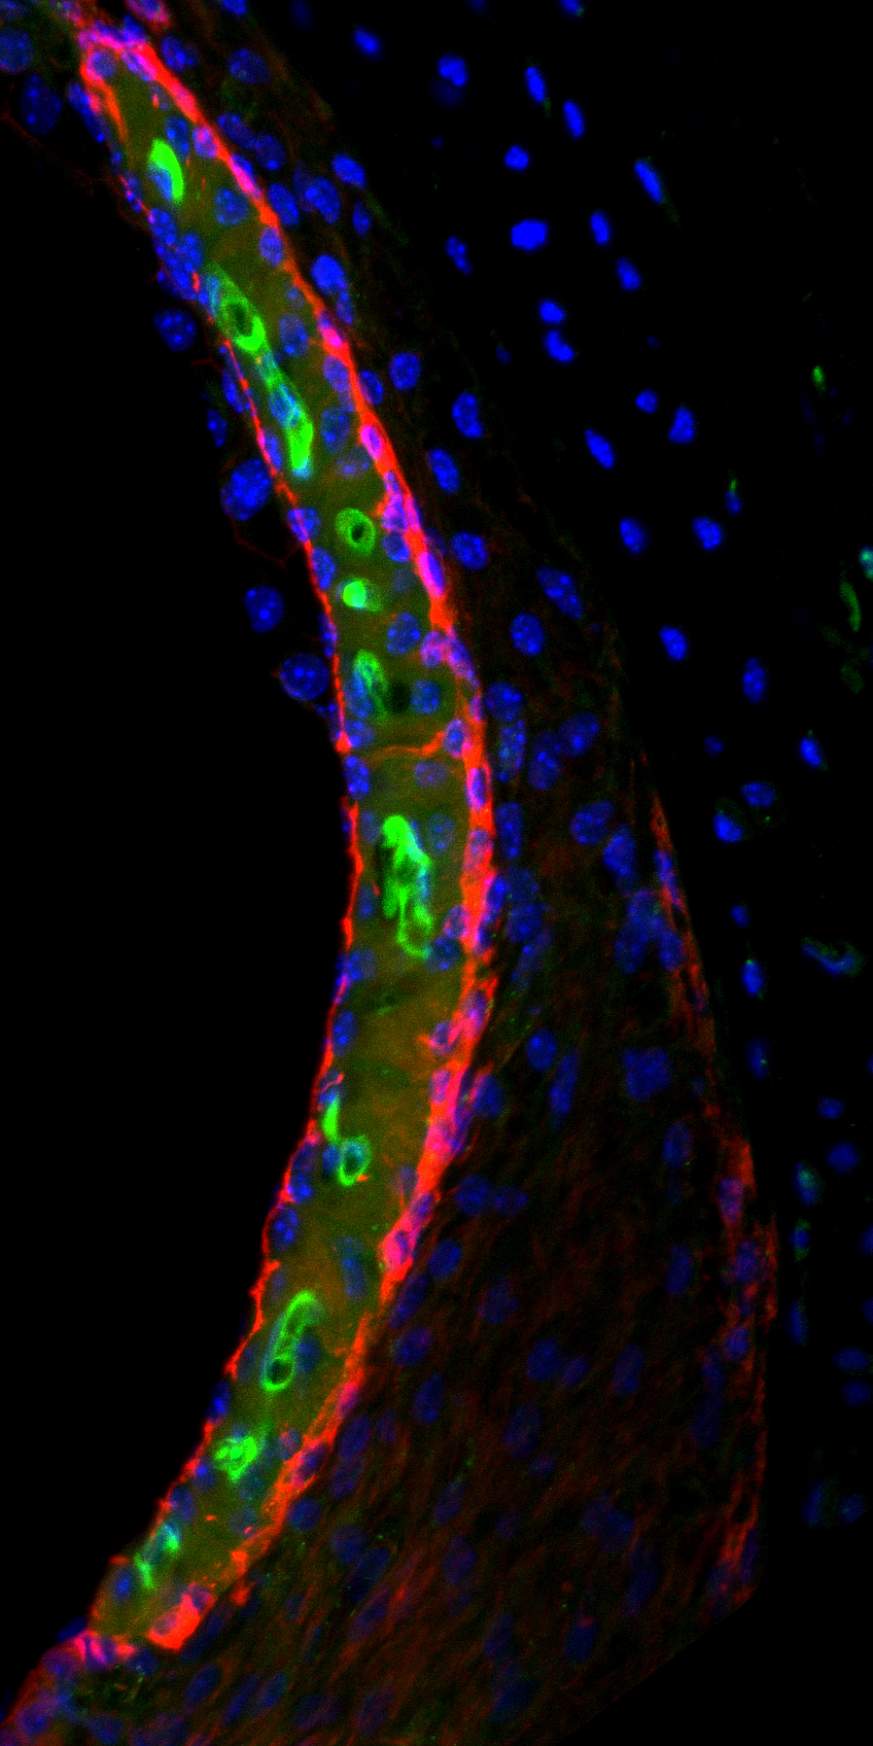 Cisplatin (appearing in green) in the stria vascularis of a mouse inner ear. [NIH]